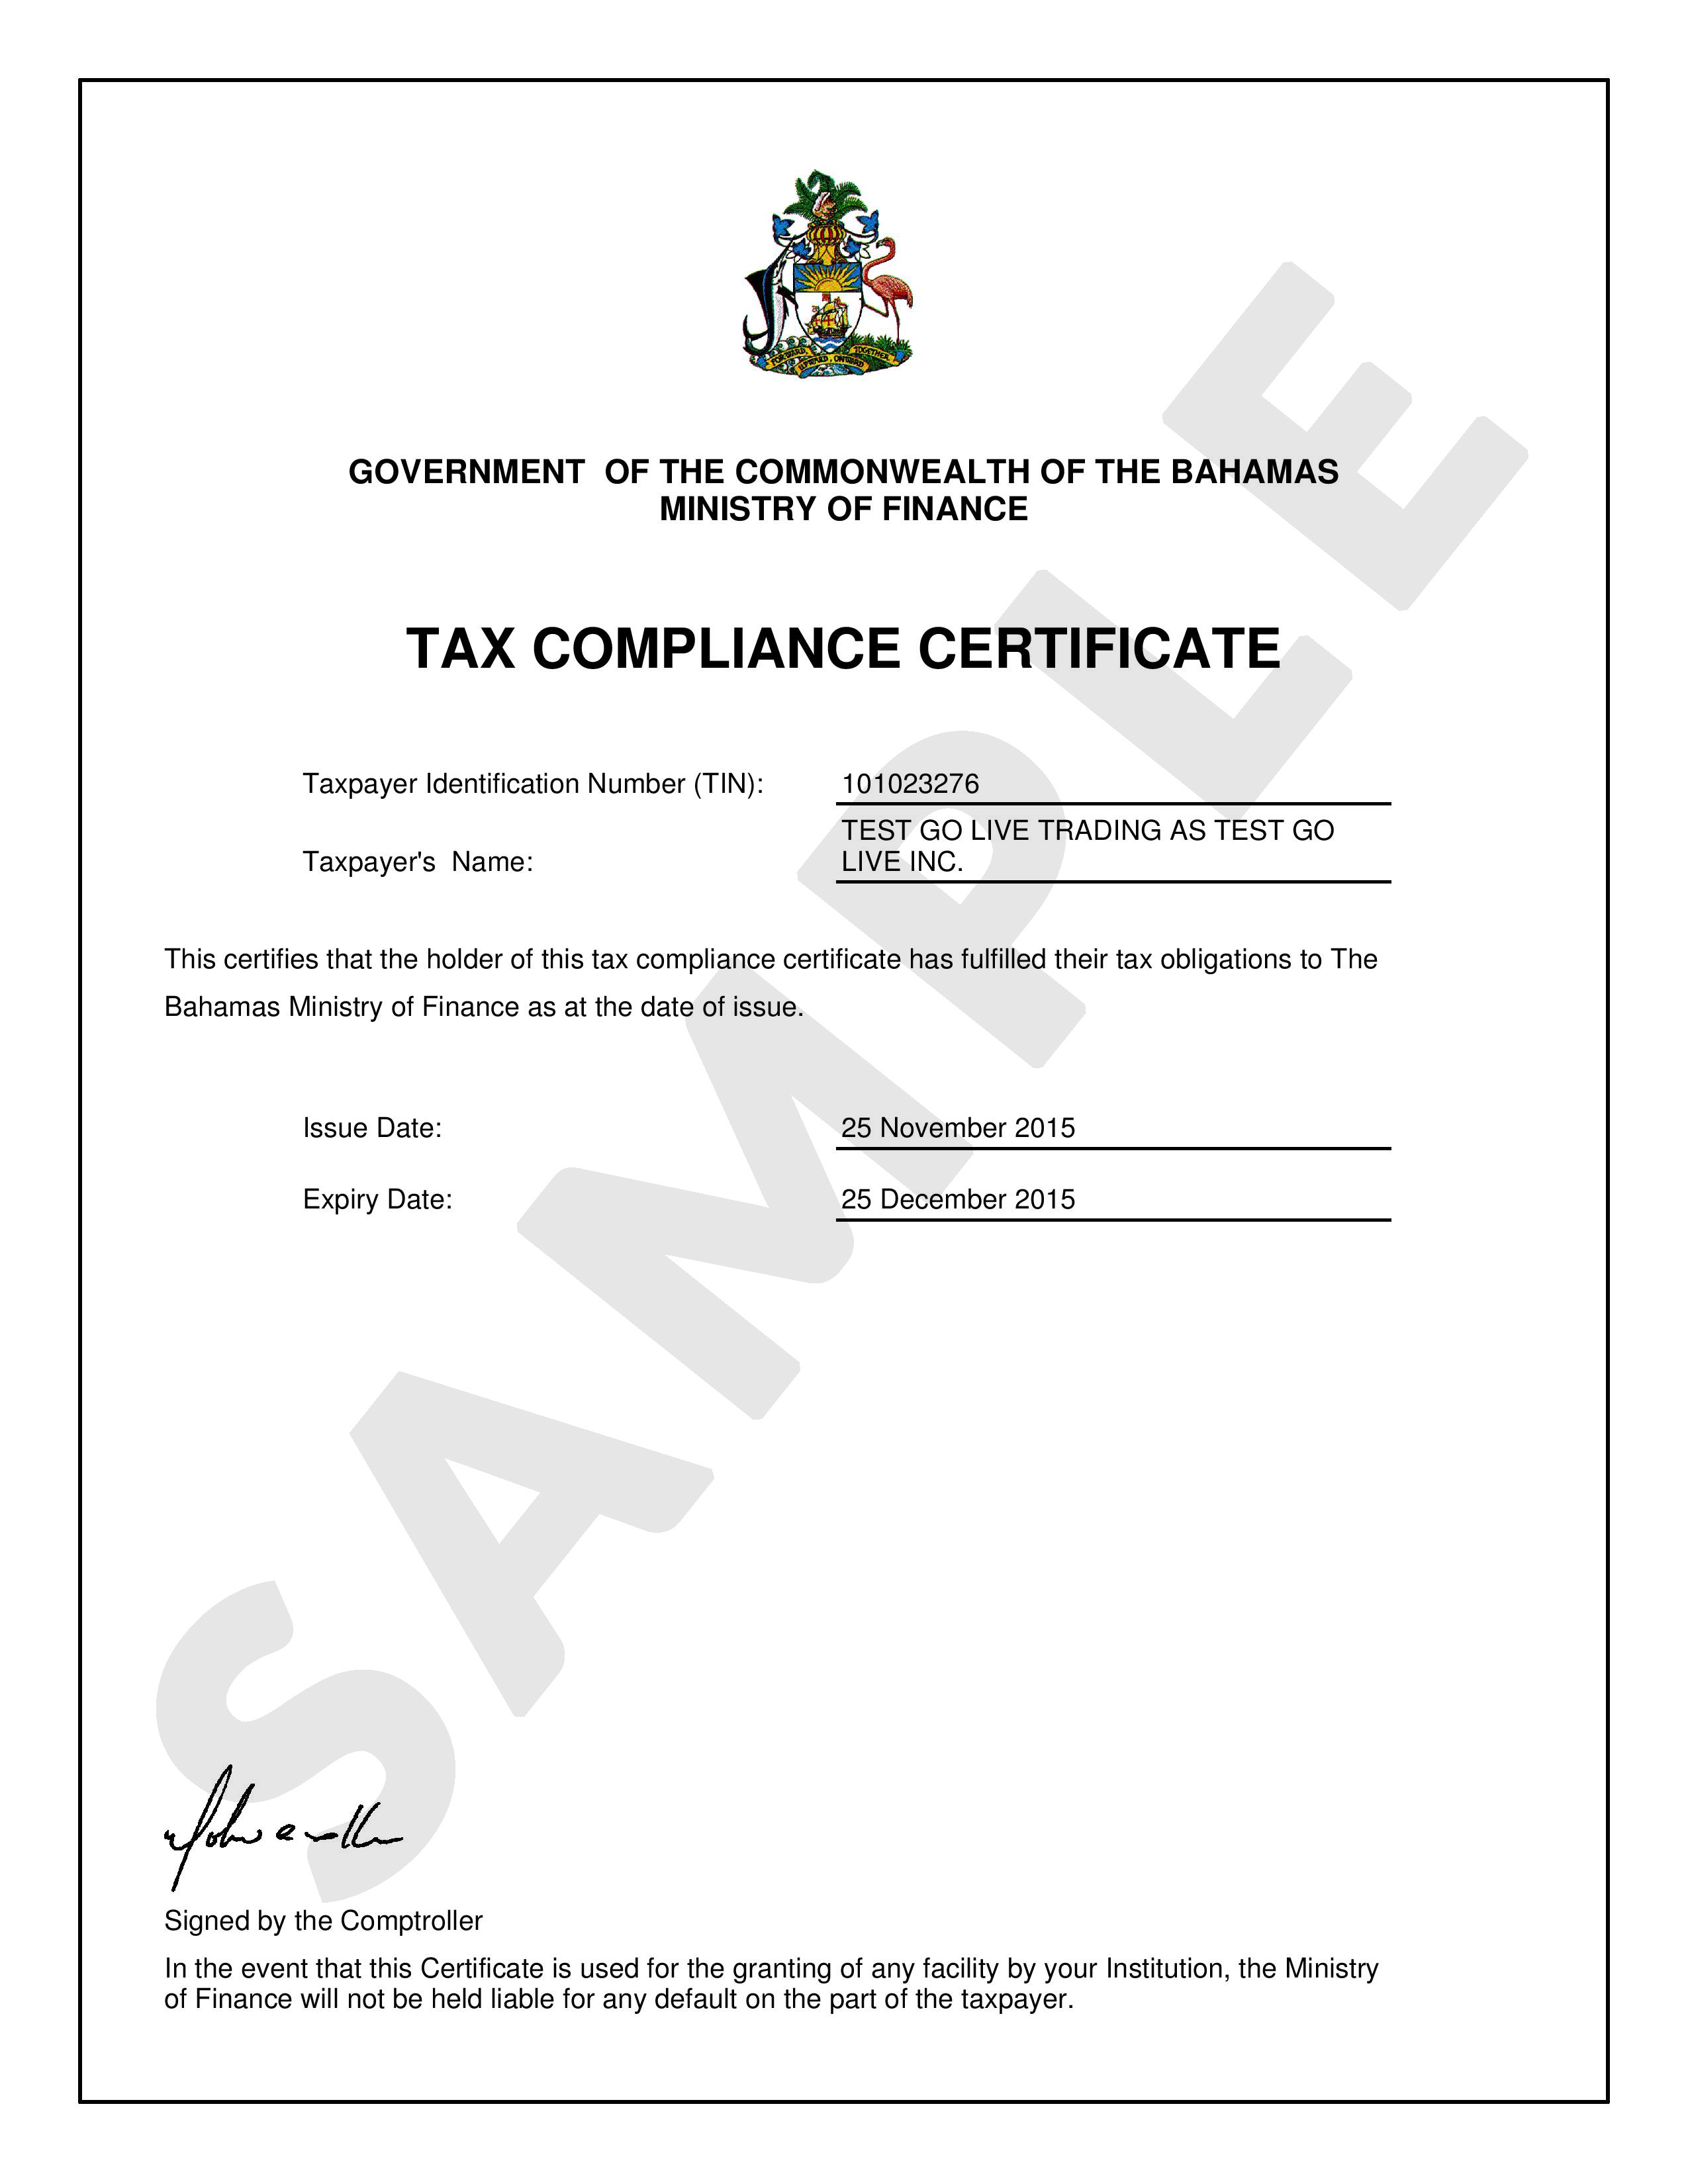 How to Apply for Tax Compliance Certificate In Bahamas Electricity